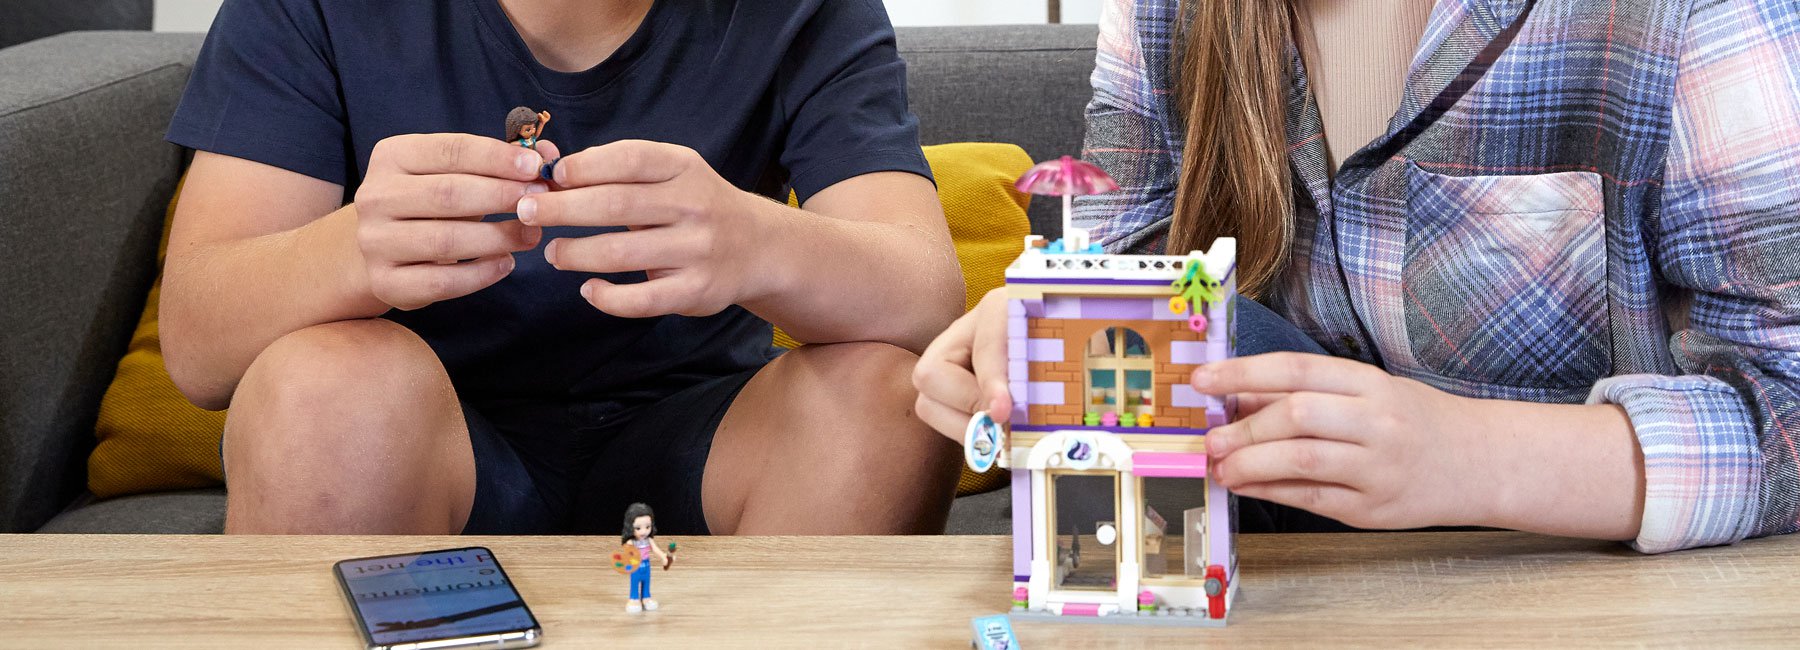 LEGO creates audio and braille instructions for blind children | Design Boom